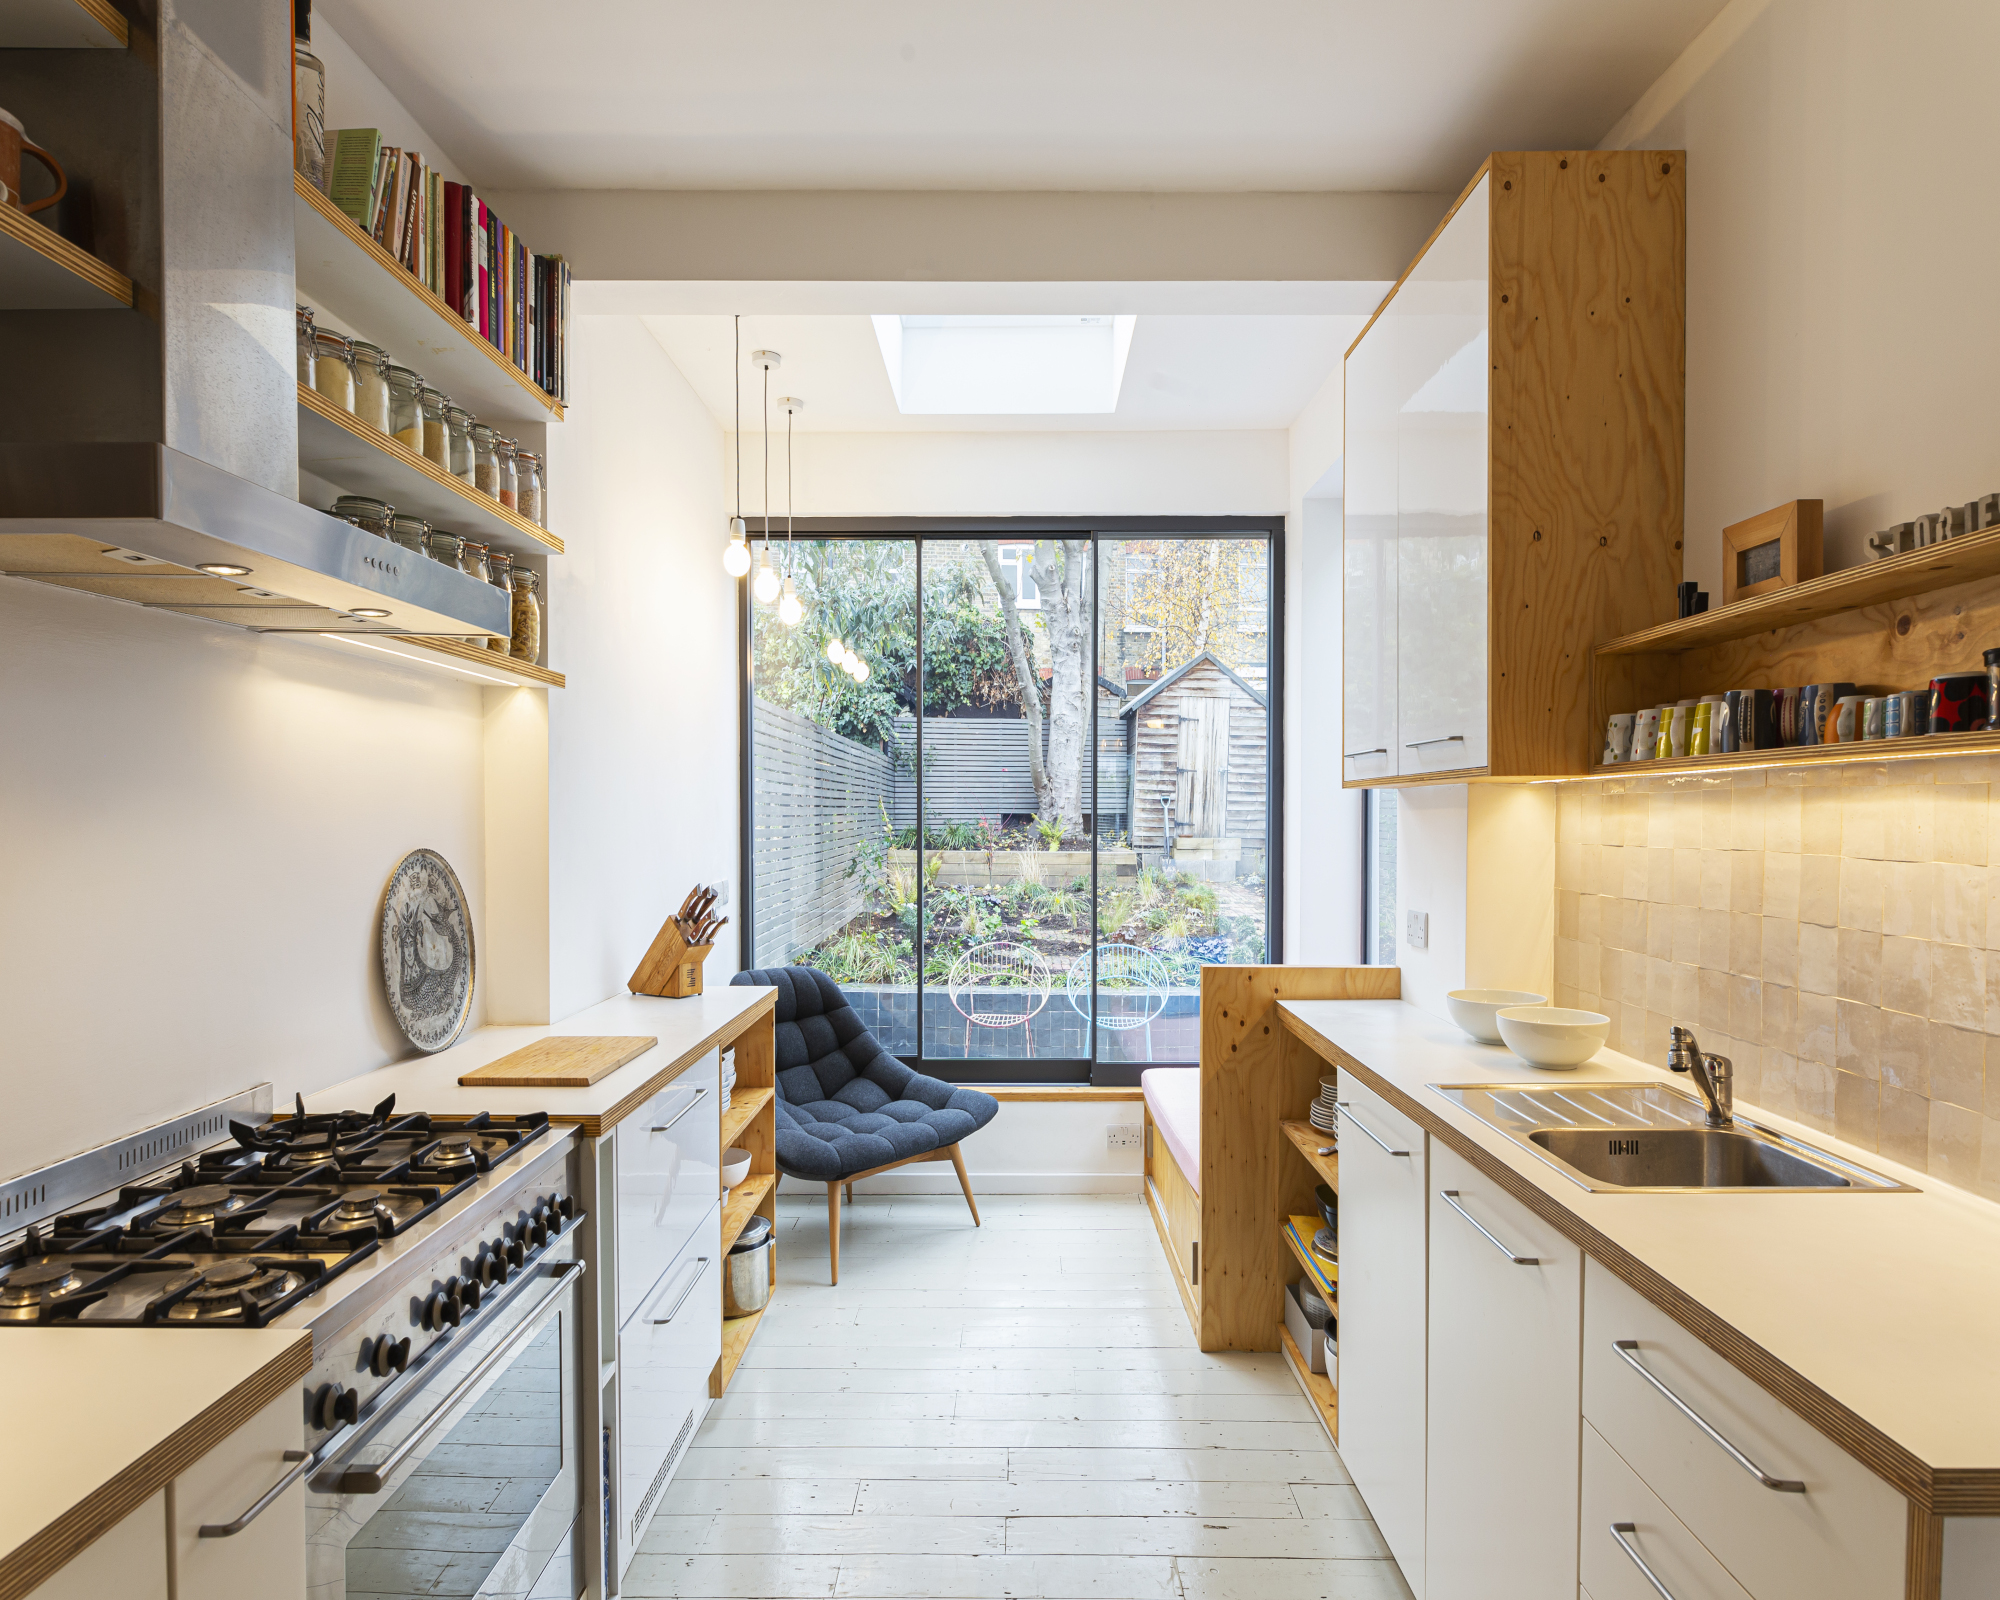 Small kitchen flooring ideas – the best options for tiny spaces